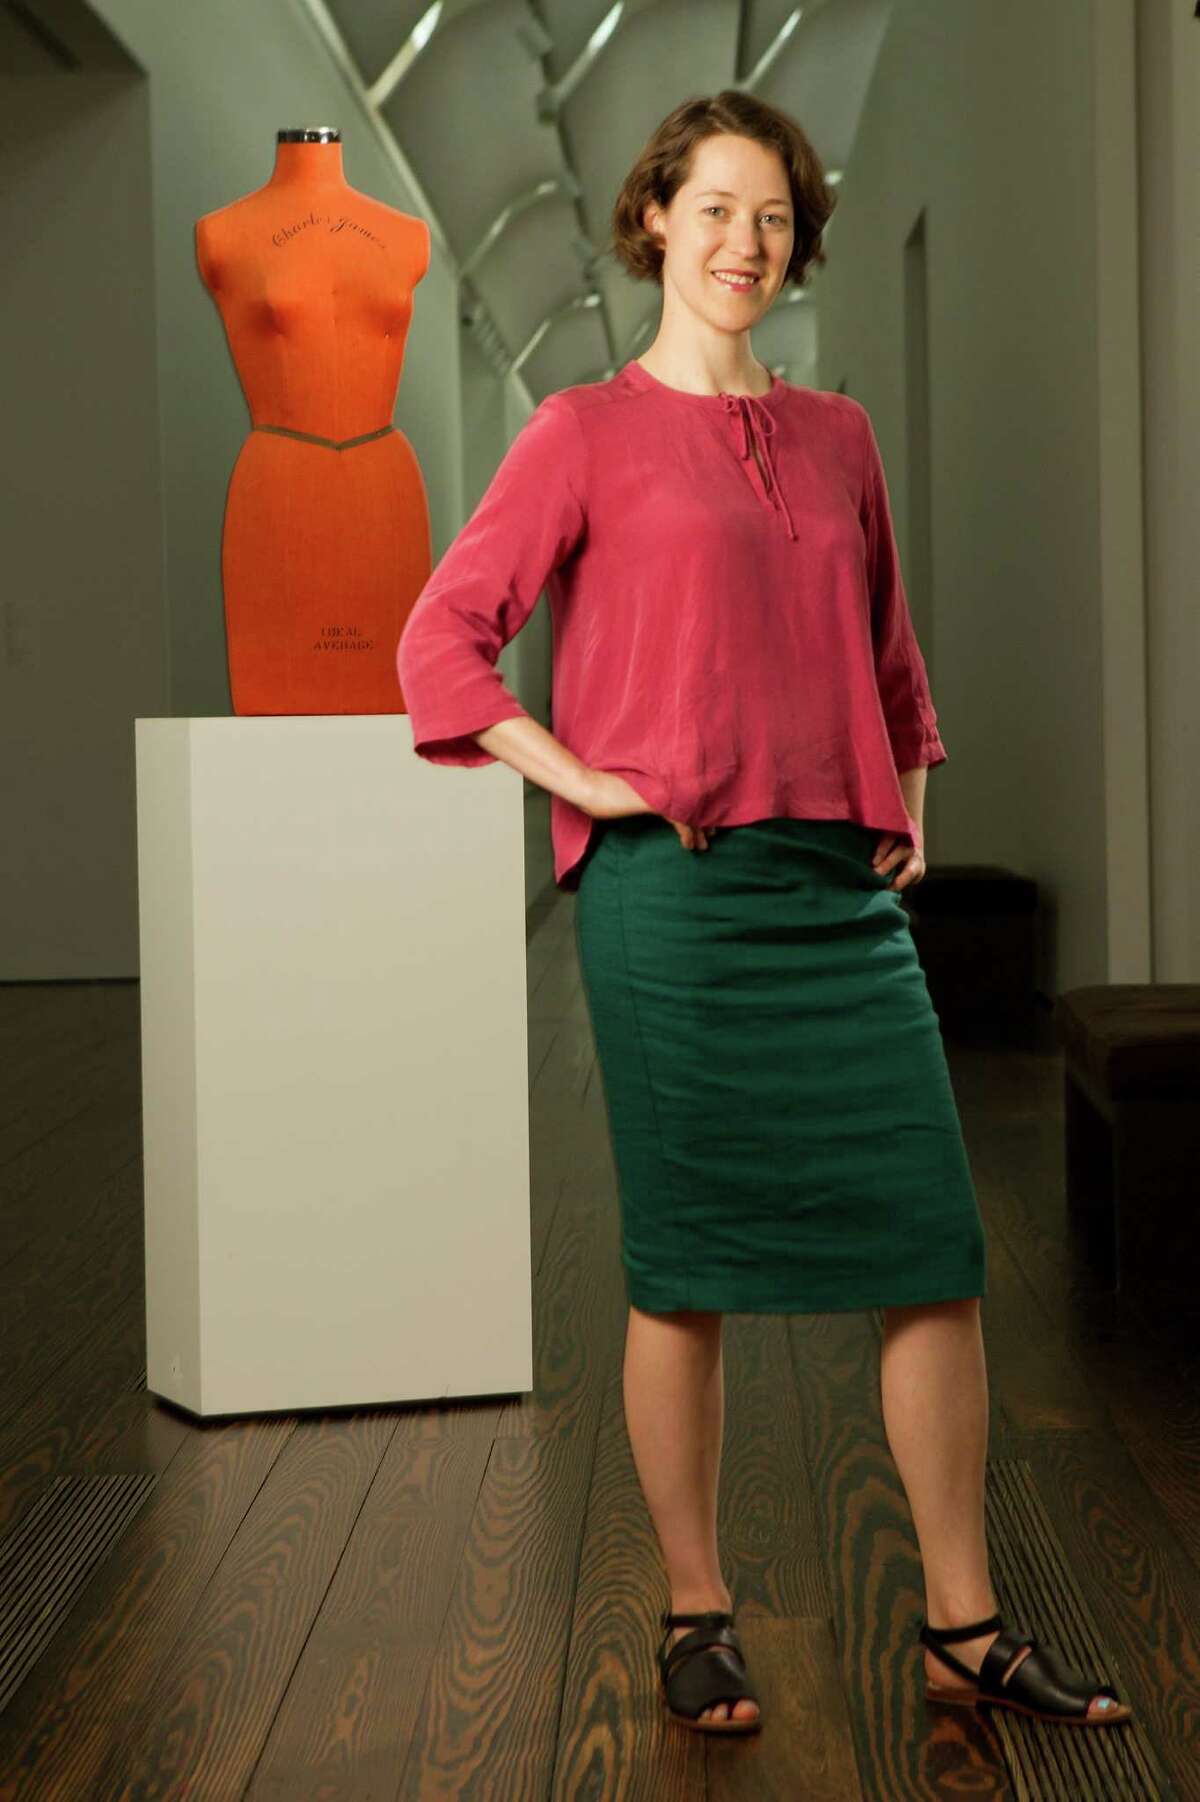 Susan Sutton, curatorial assistant at the Menil Collection, poses for a portrait with a Charles James dress form on Monday, May 12, 2014, in Houston. Sutton has organized the exhibition "A Thin Wall of Air: Charles James." Sutton is wearing a top by Humanoid, a skirt by Samuji and sandals by Rachel Comey. ( Brett Coomer / Houston Chronicle )